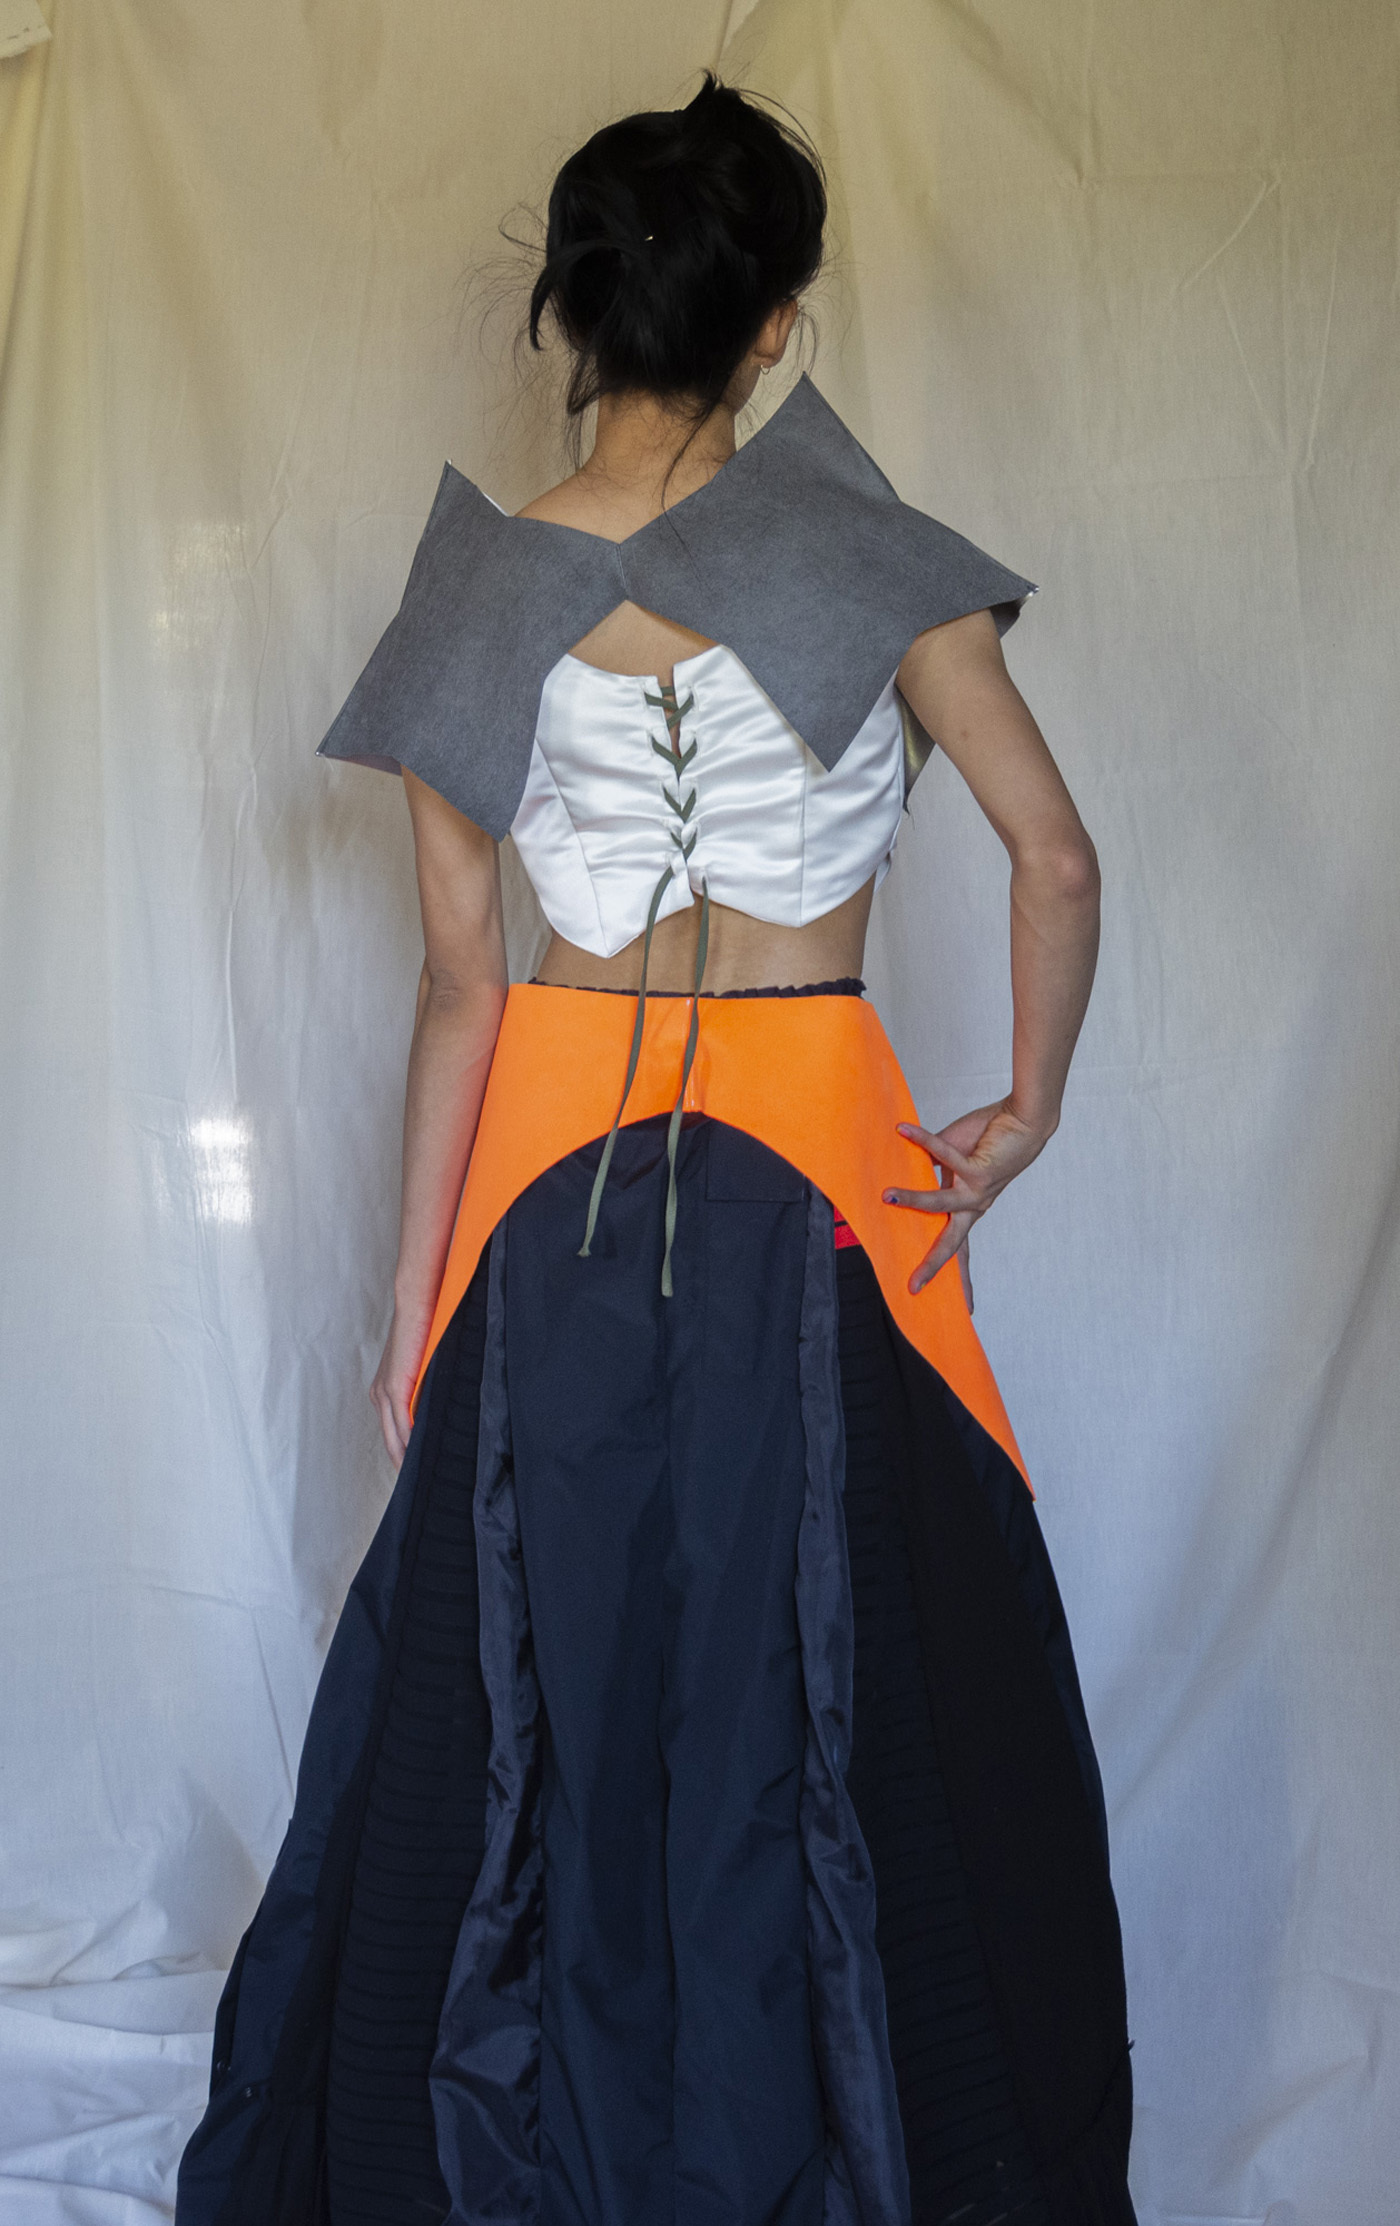 backside view of the Project Upcycle garment. Two four-pointed star shaped shoulder pieces stand over a white shiny corset piece that is tied at the back with green fabric. The dress is black with a bright neon orange geometric shape on top.